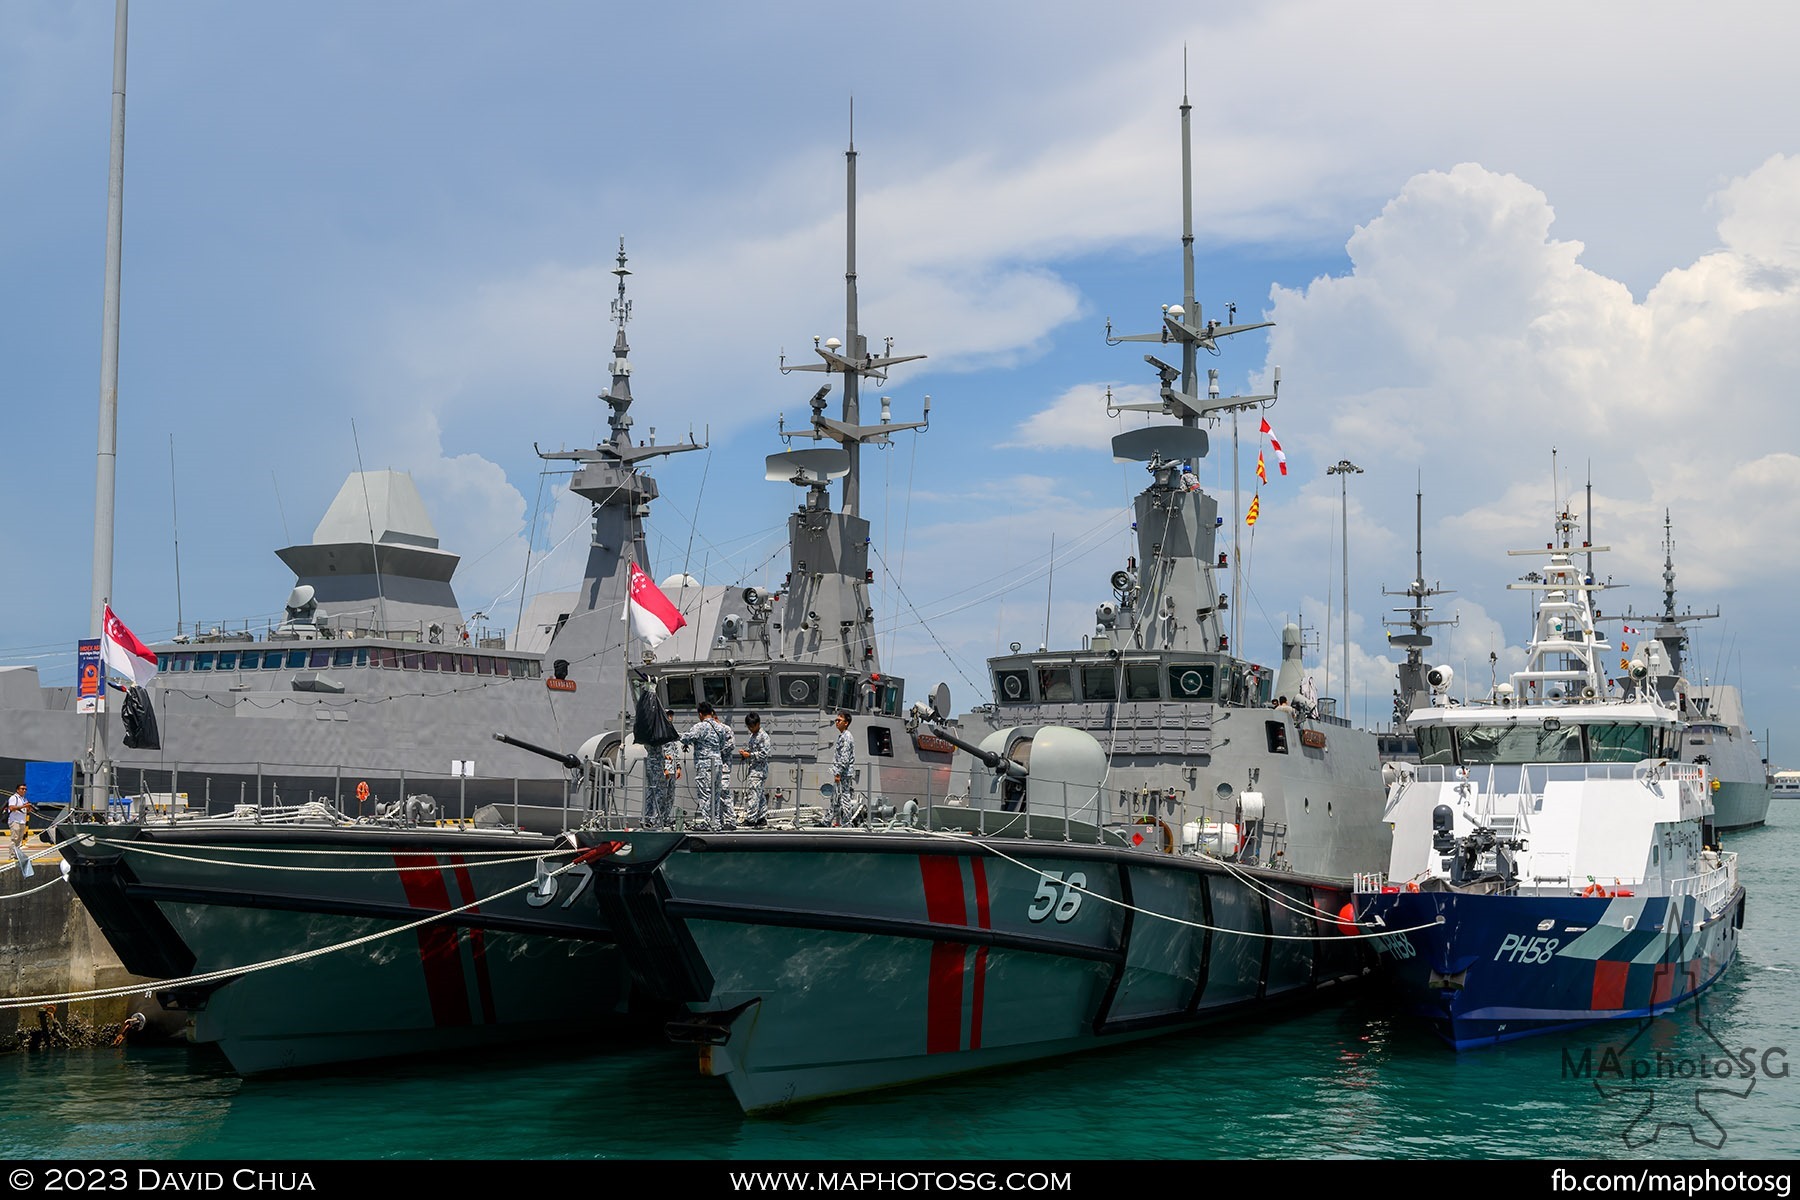 MSRV Protector (57), MSRV Bastion (58) of the Republic of Singapore Navy and Whitetip Shark (PH58) of the Police Coast Guard